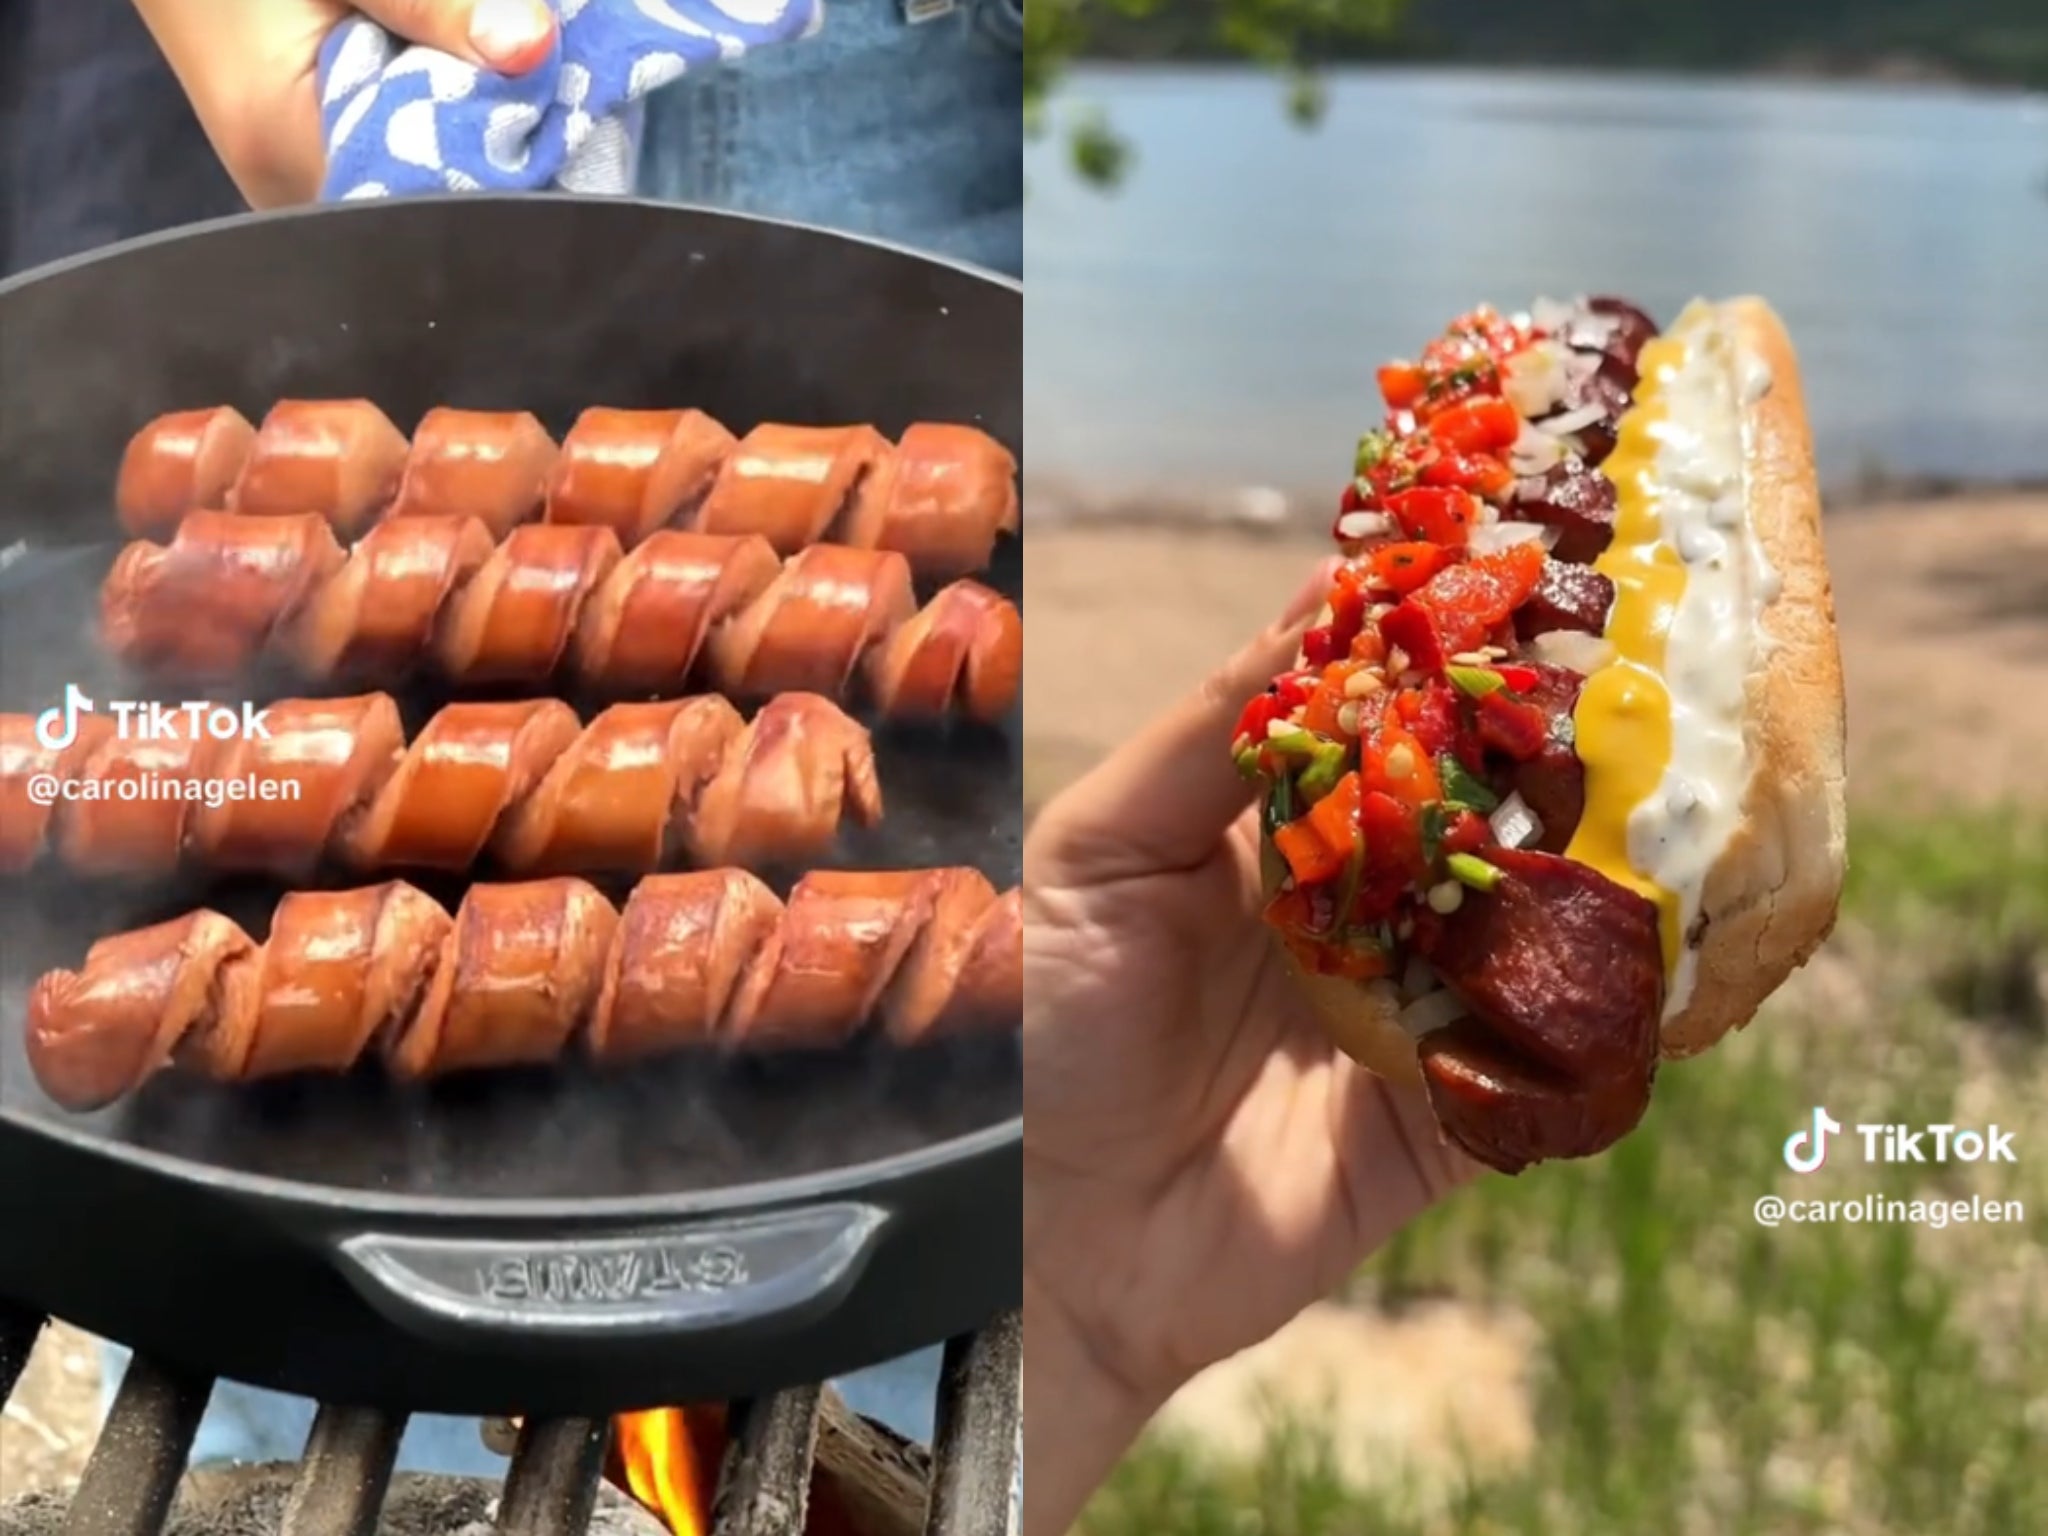 This Hotdog Is Made 100% Out Of Hotdog 😱 